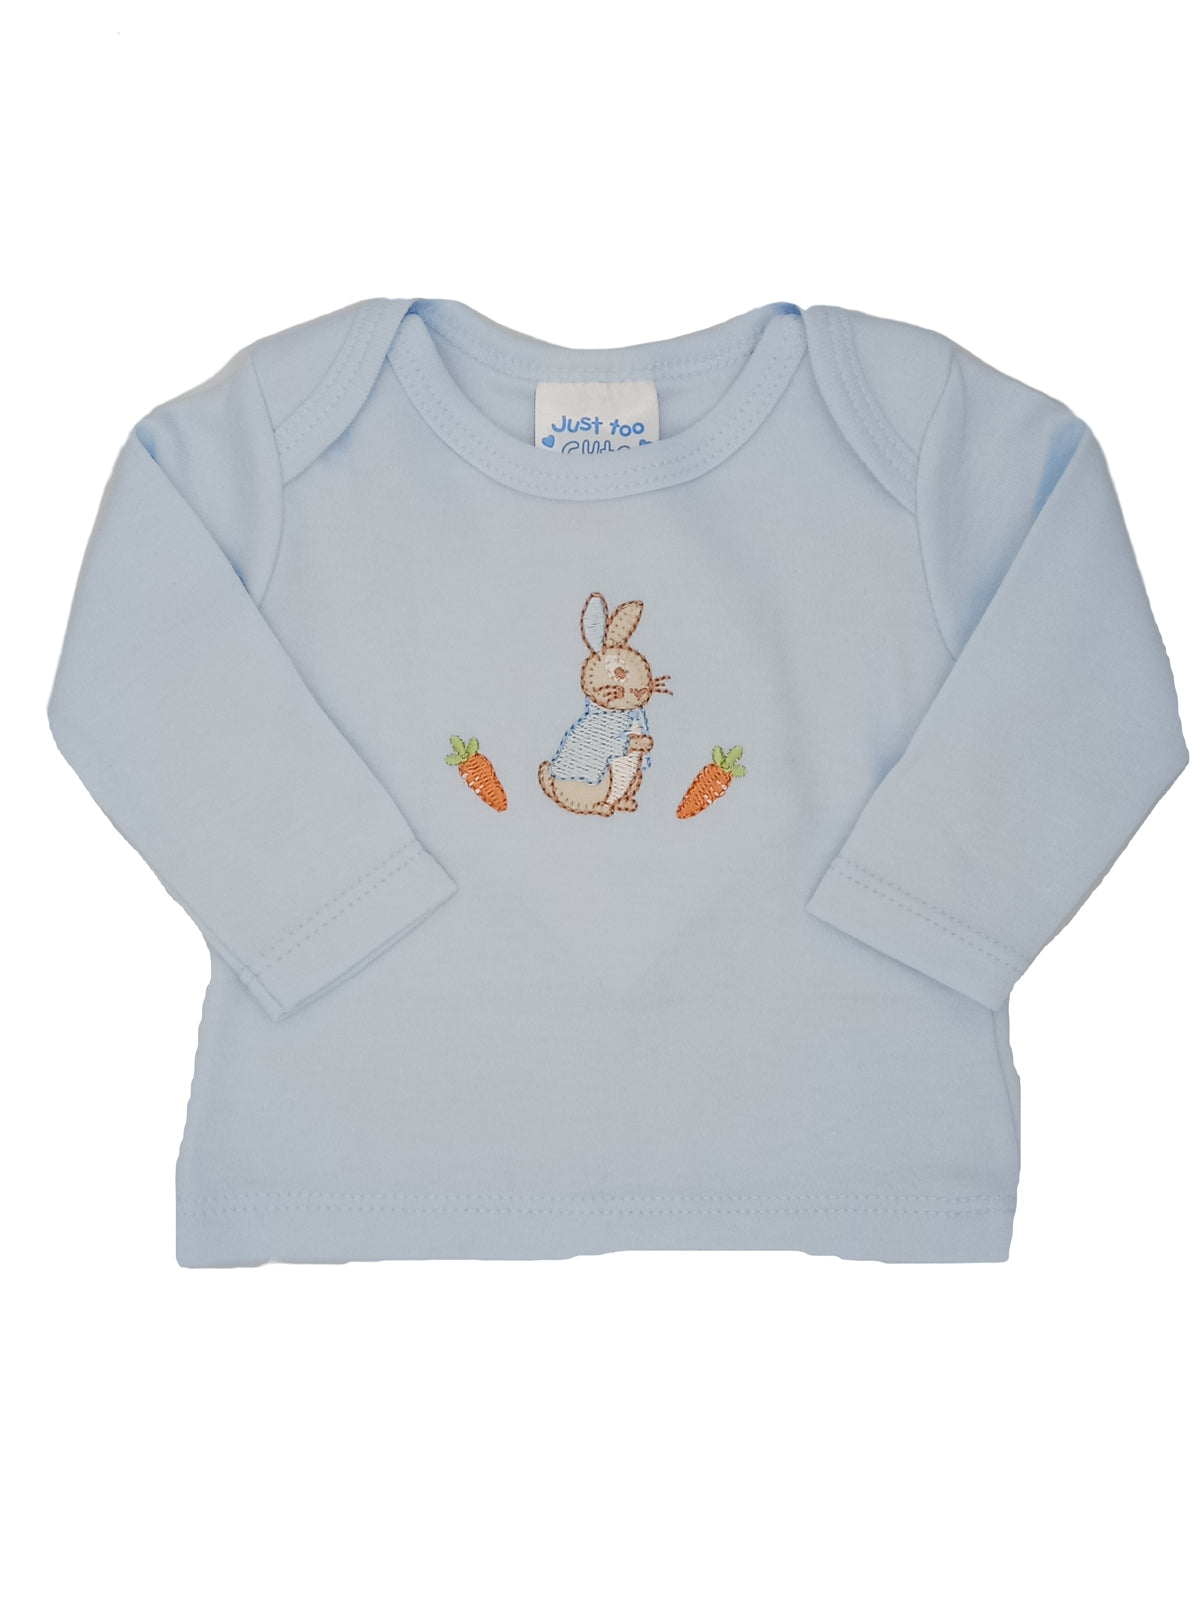 Rabbit 3 Piece Gift Set - Blue : Dungarees, Top and Hat - Set - Just too Cute